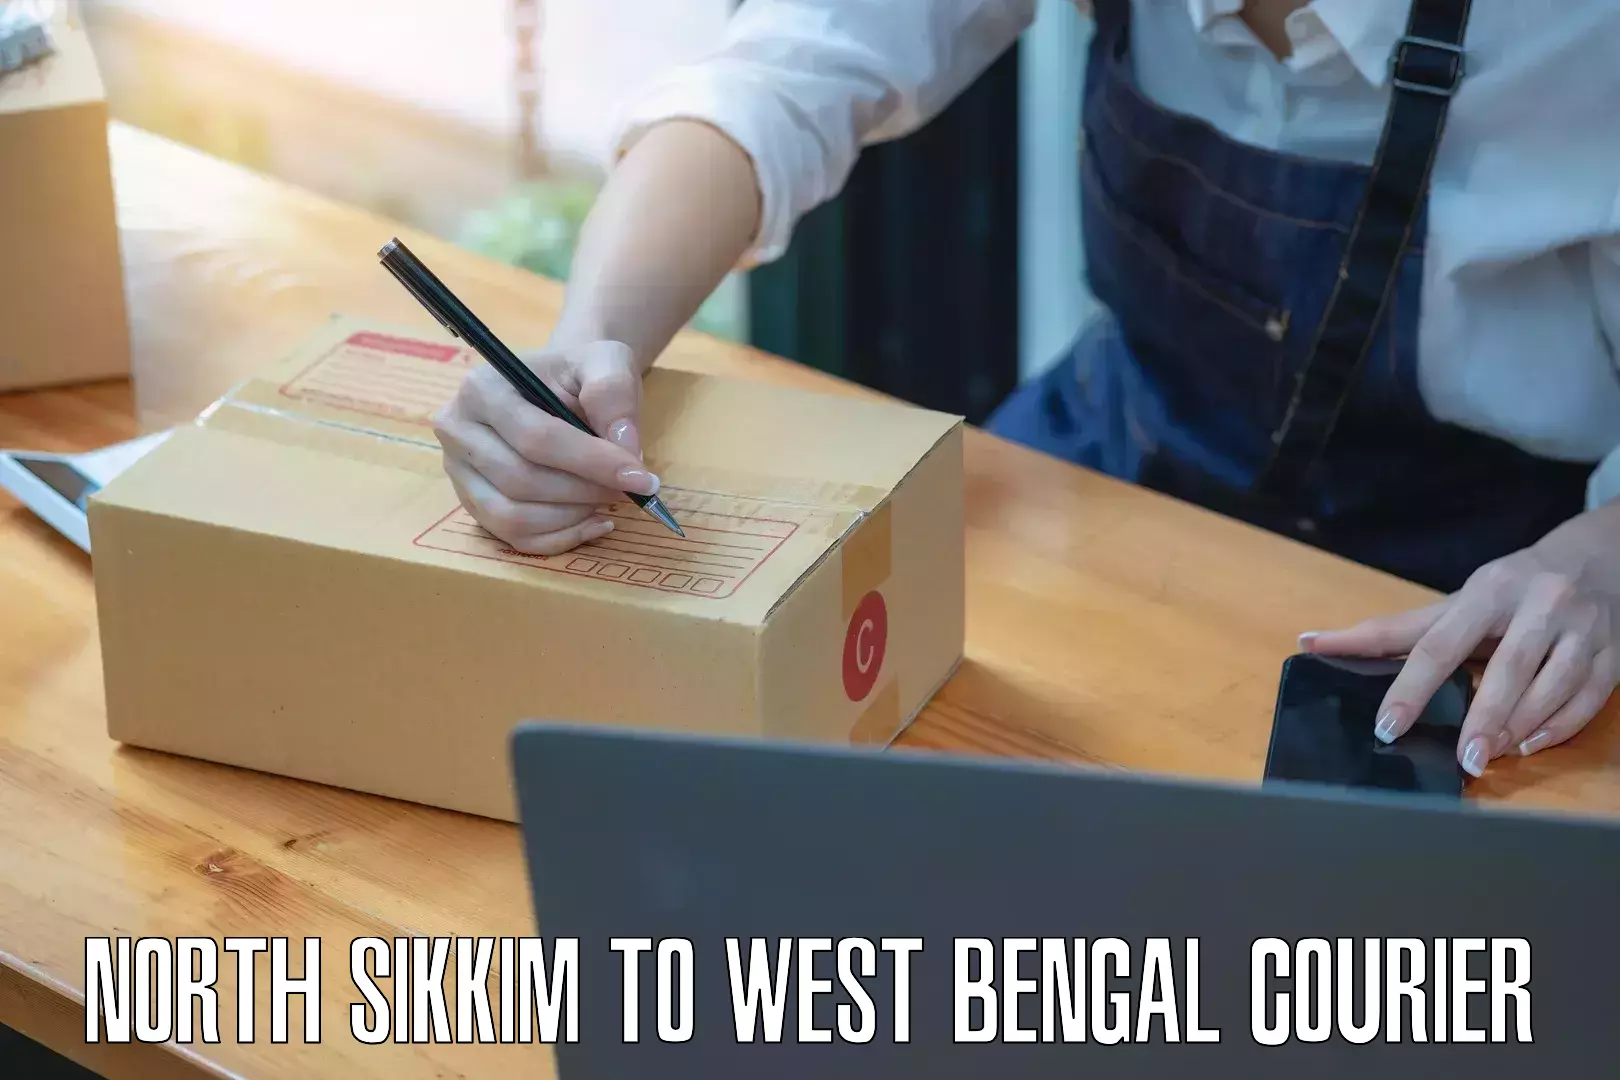 Reliable logistics providers North Sikkim to West Bengal